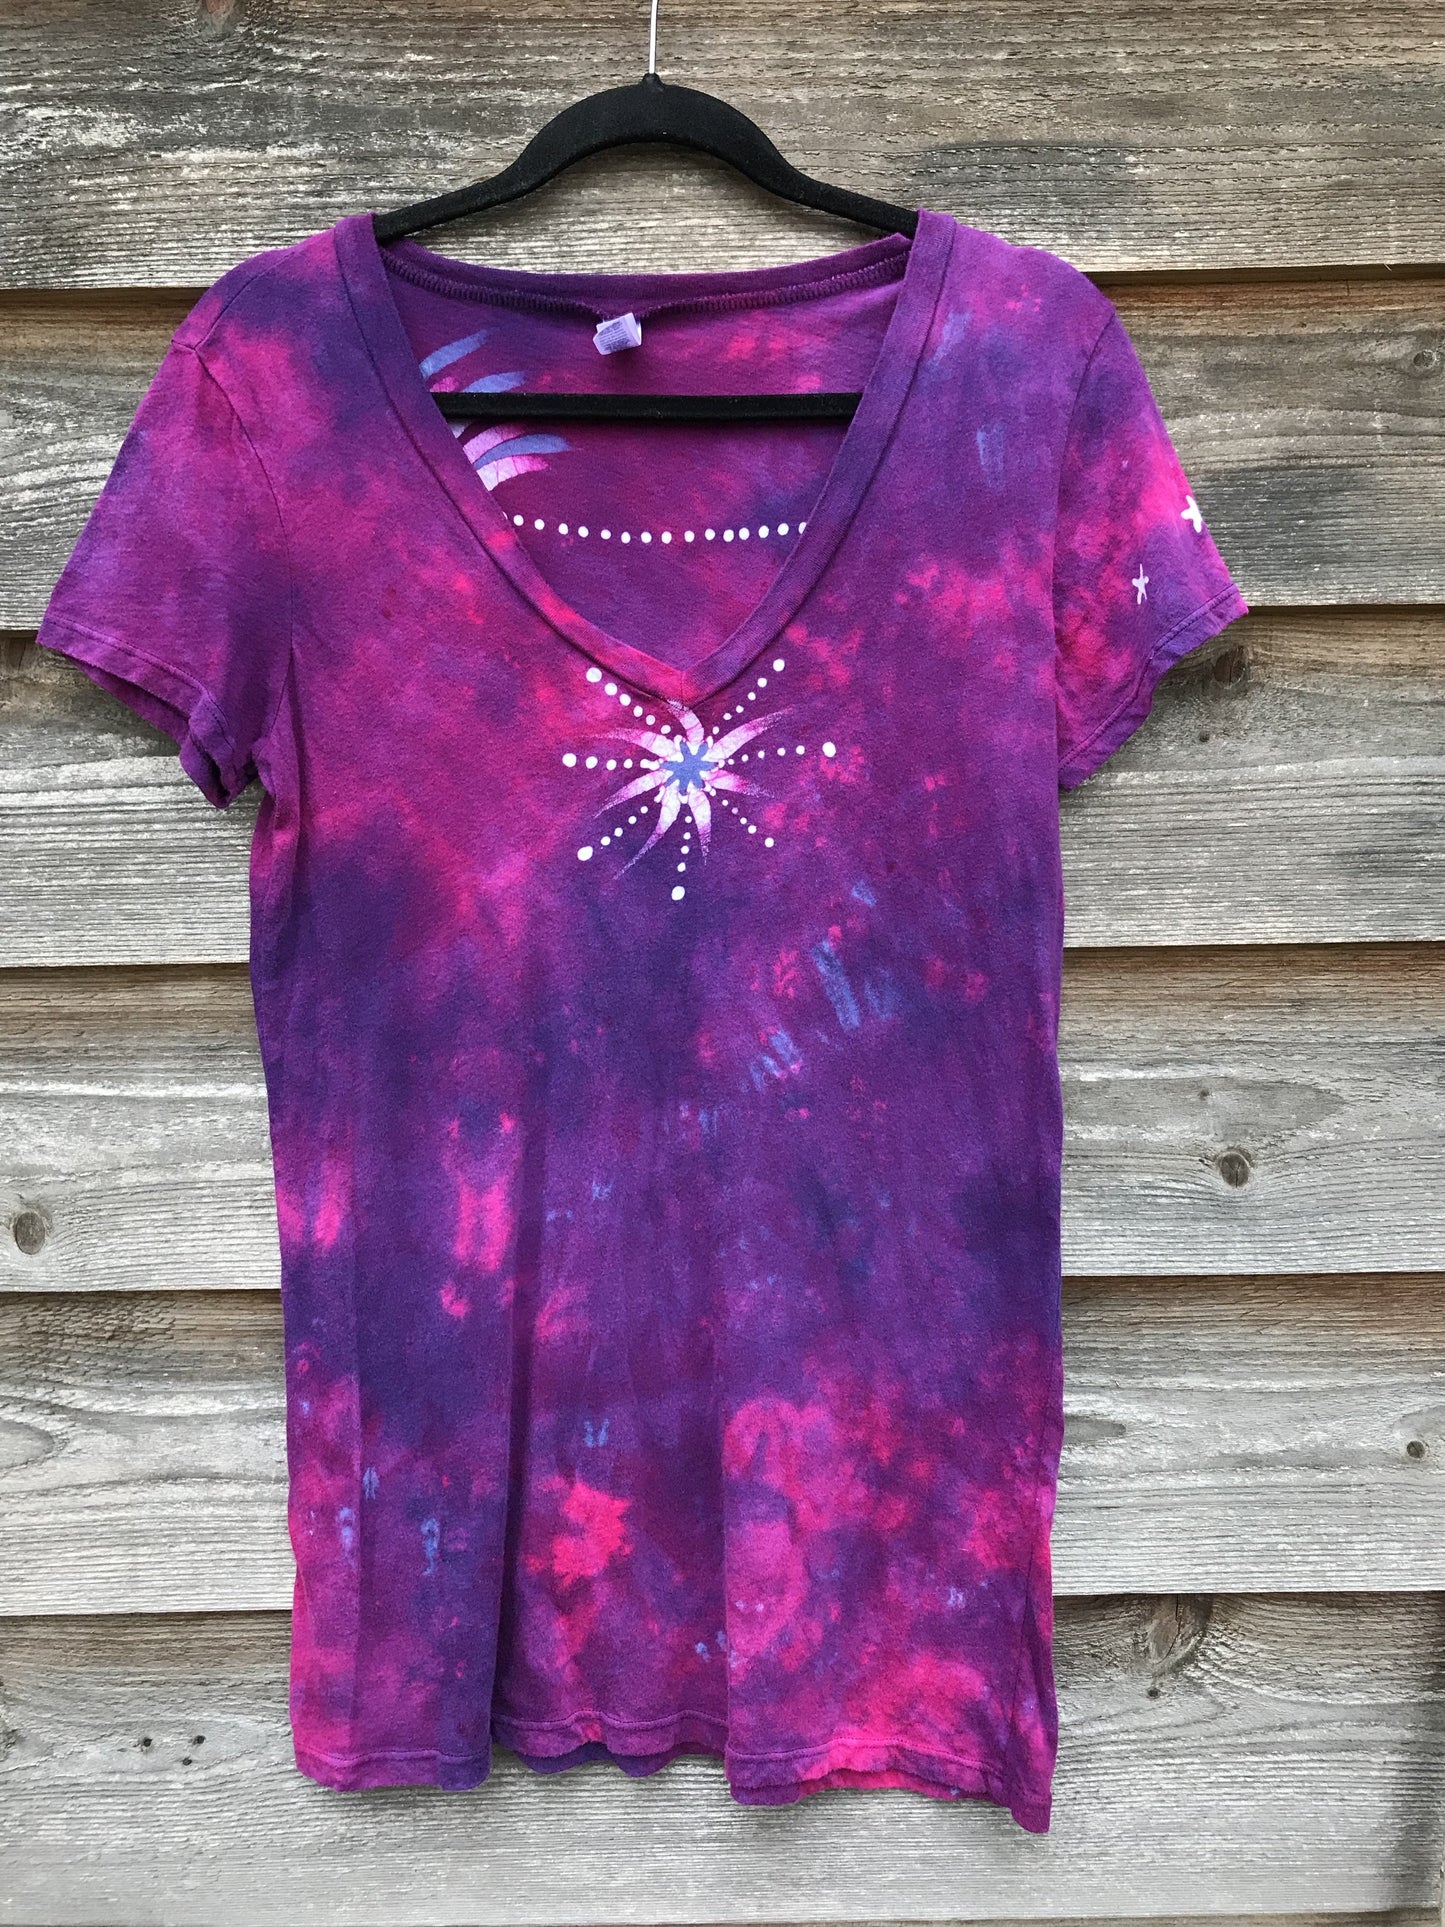 Sale Basket - Lightly Sweet Center Star in Bright Purple Hand Painted Vneck Tee - Size XL